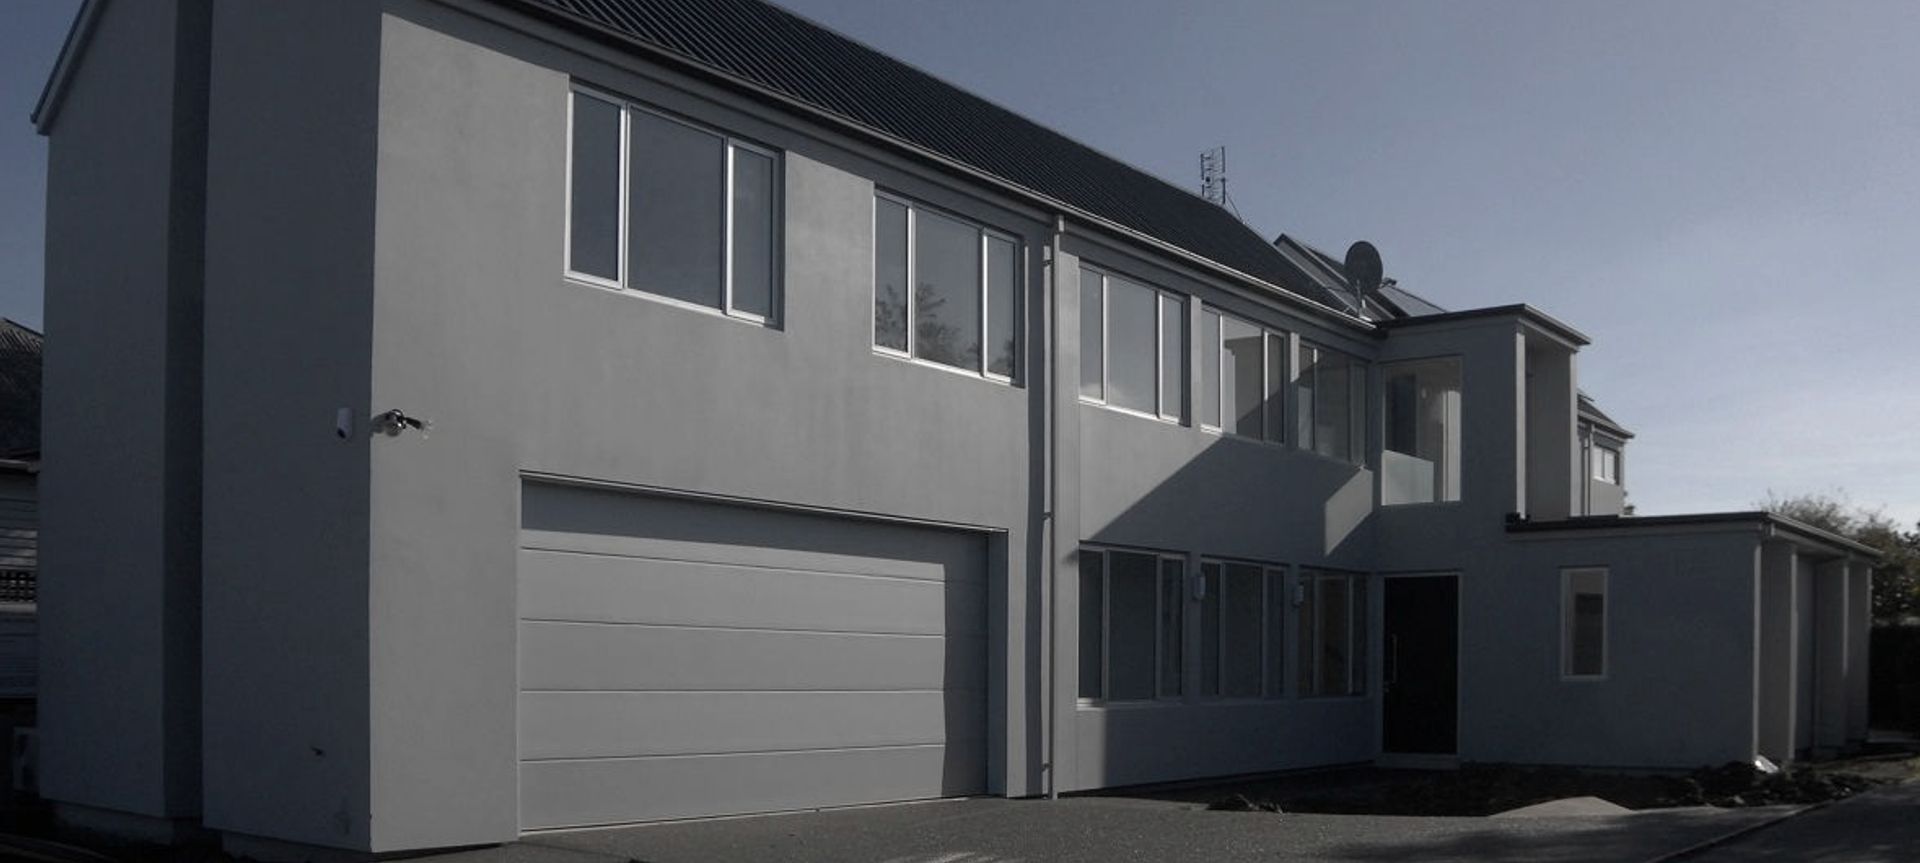 New Zealand’s first two-storey house built on TC3 land banner